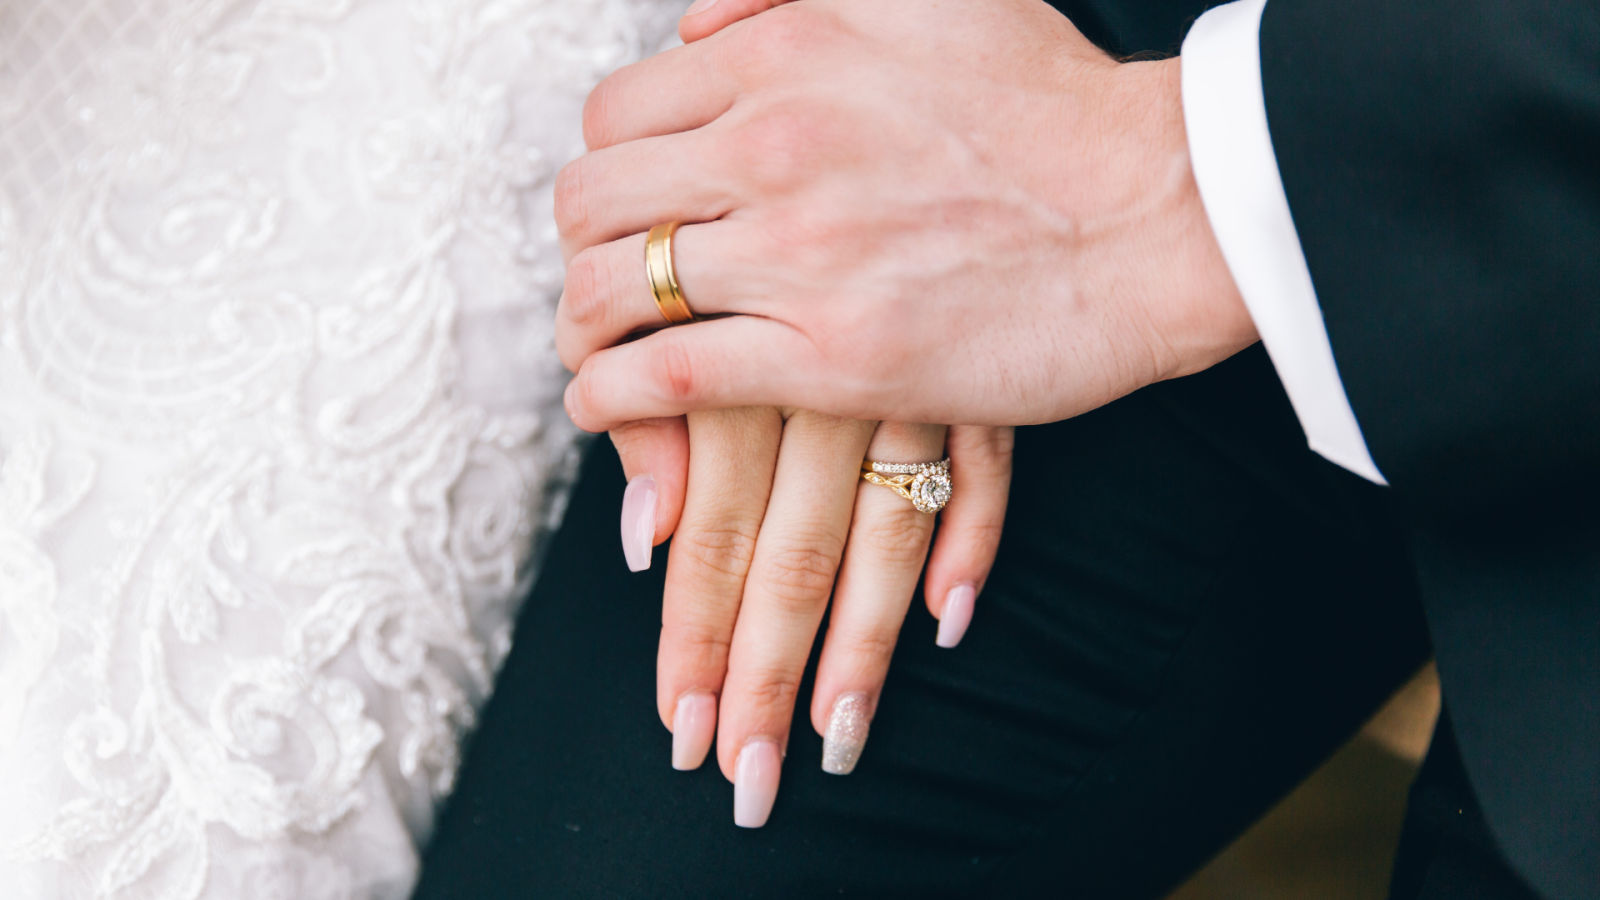 Guide to choosing a unique wedding ring